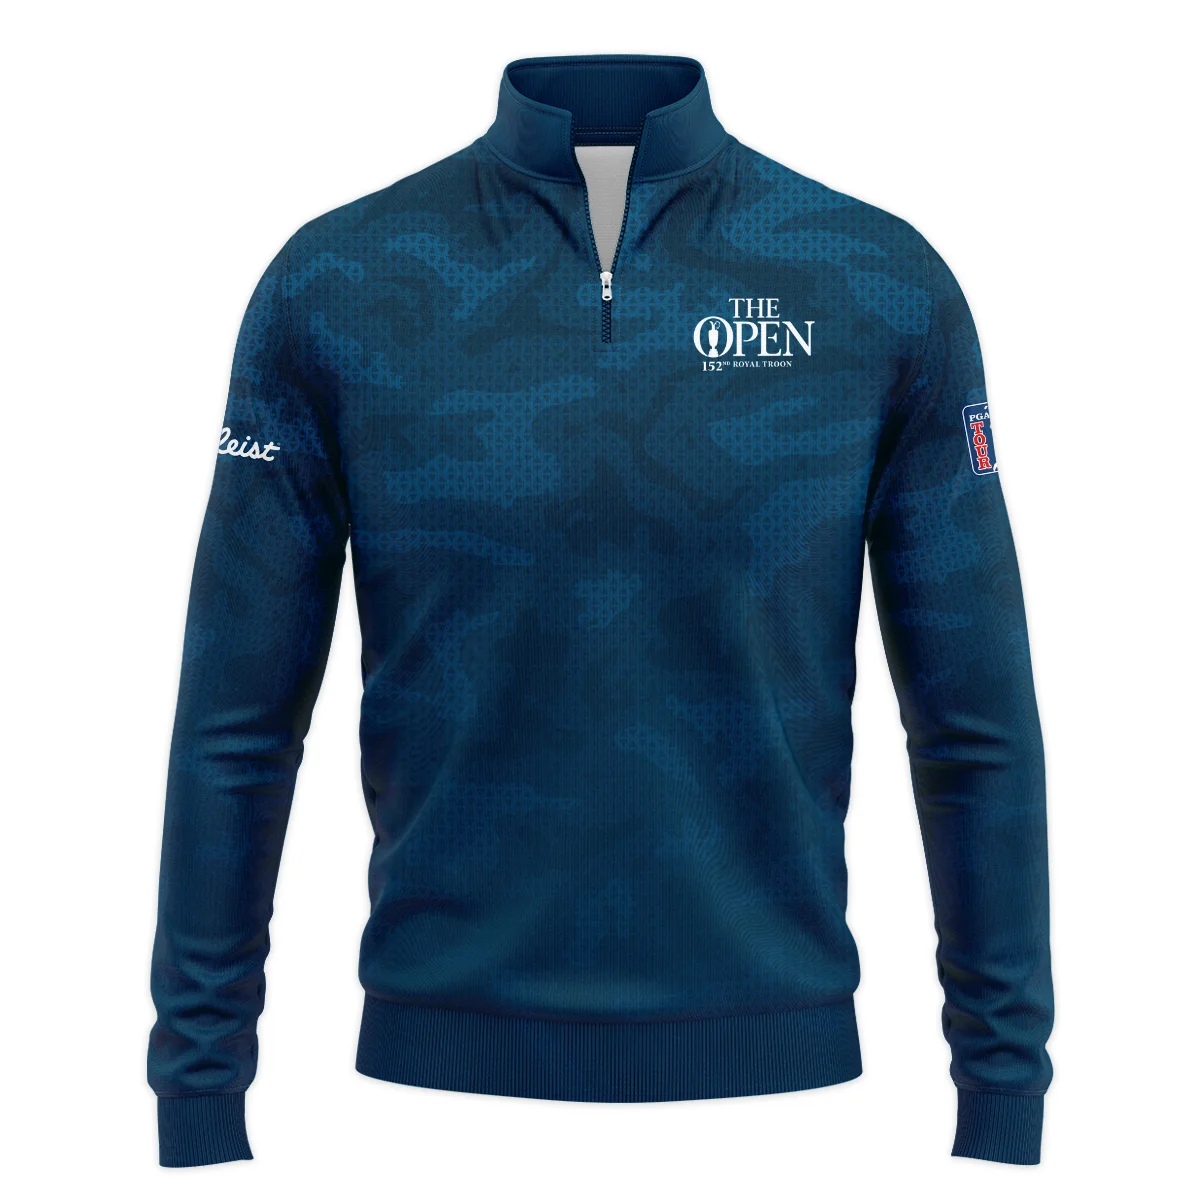 Titleist 152nd Open Championship Dark Blue Abstract Background Performance Quarter Zip Sweatshirt With Pockets All Over Prints HOTOP260624A02TLTS